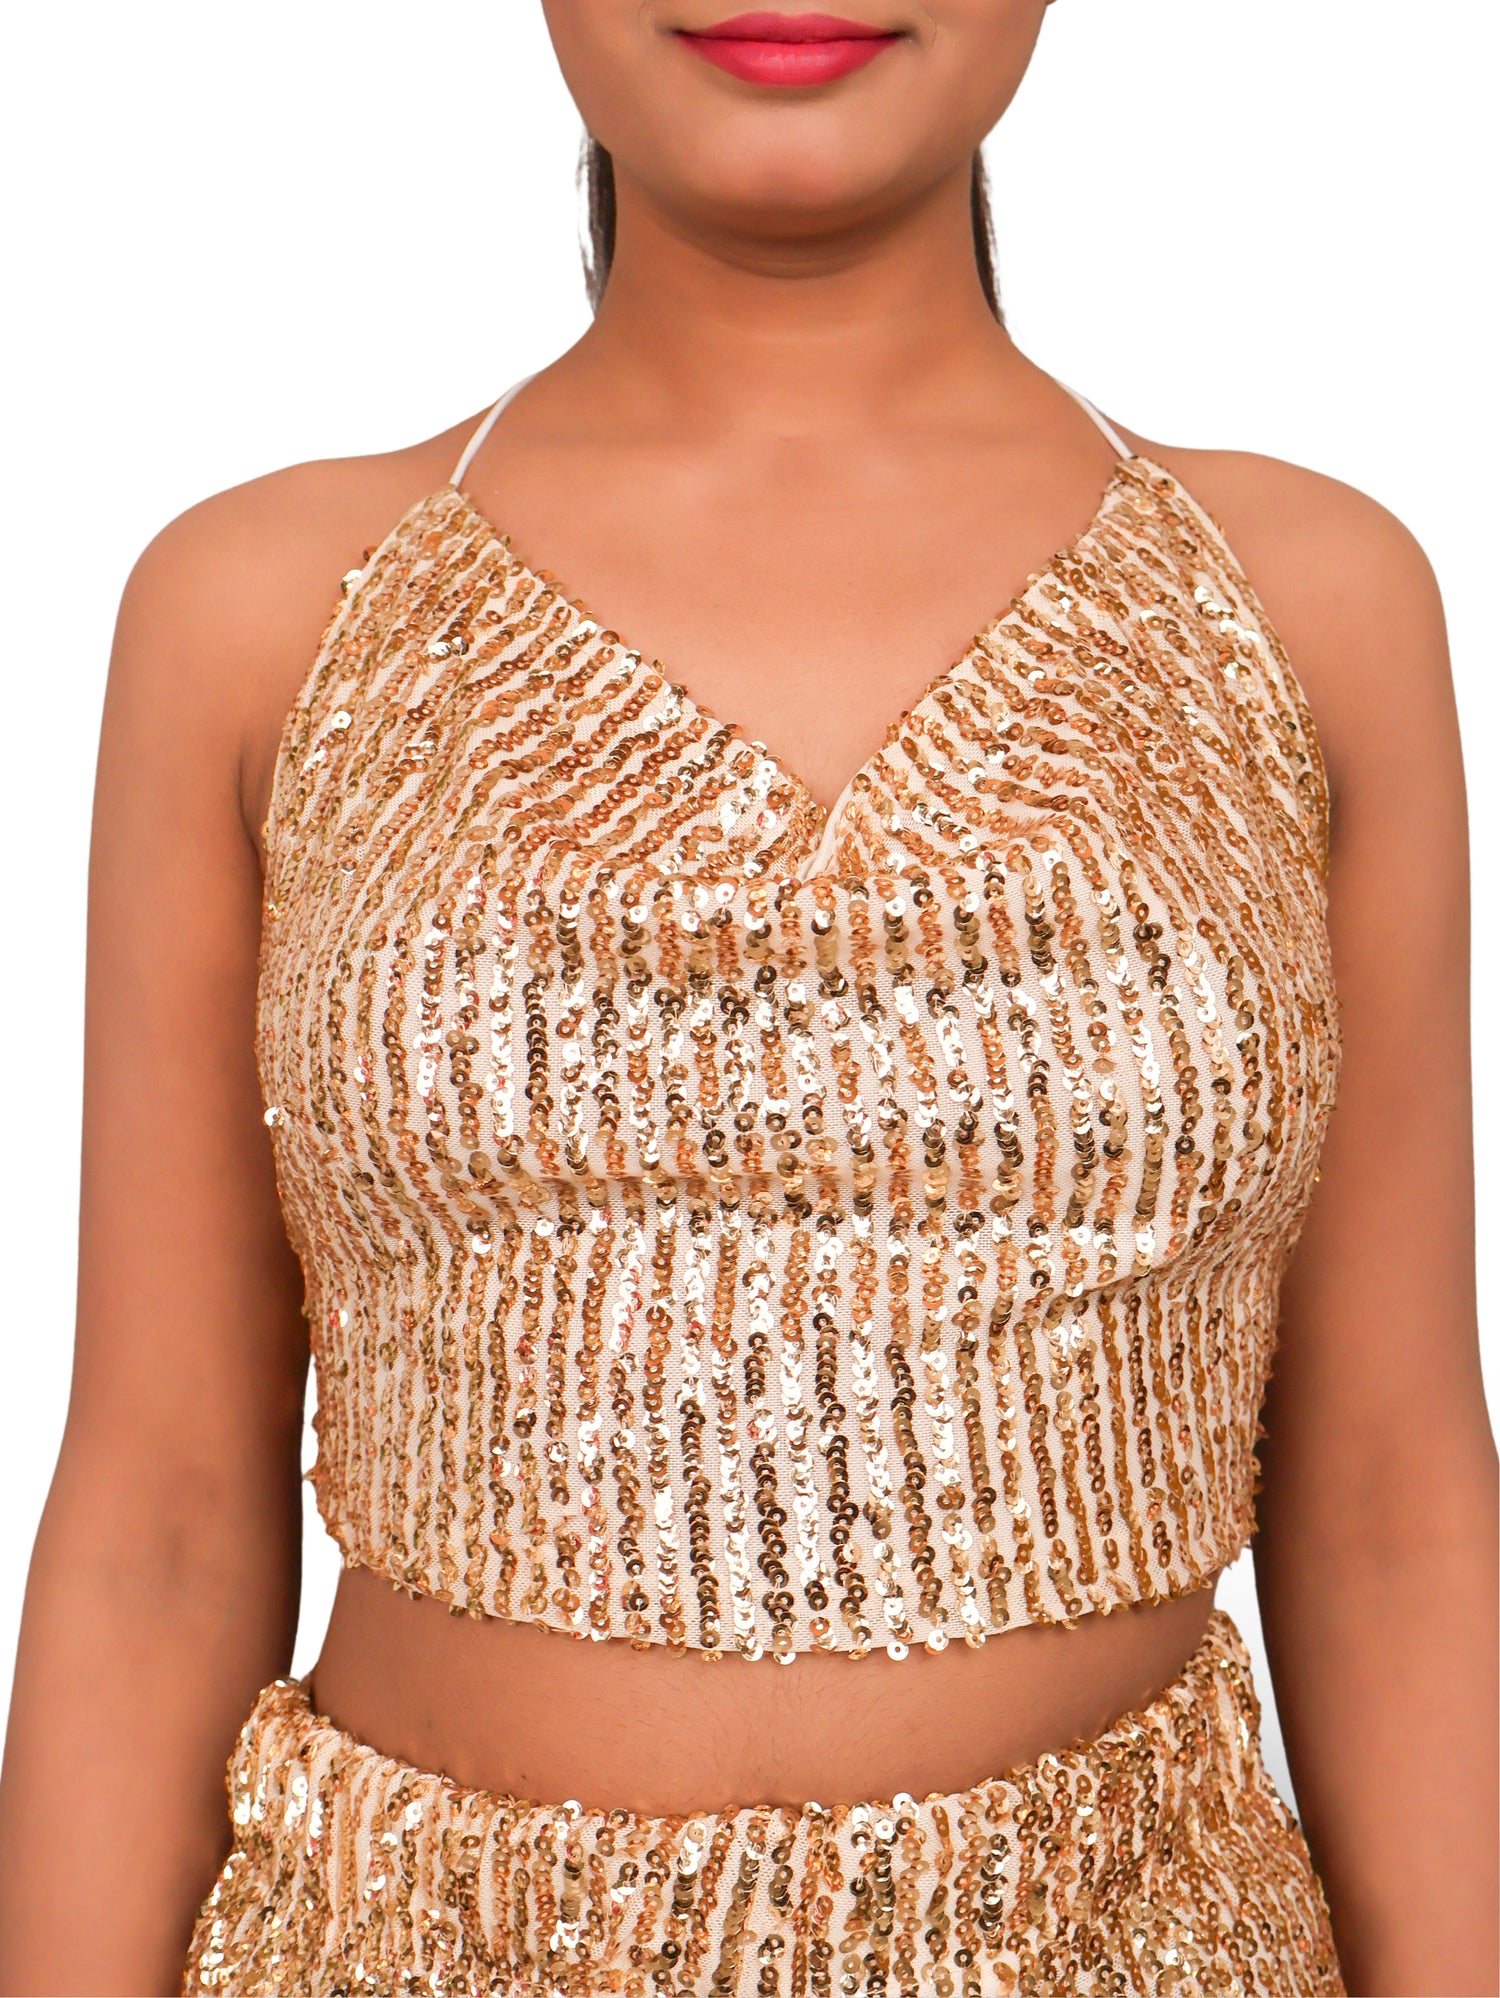 Sequins Spaghetti Neck Co-Ord Set by Shreekama Gold Dress for Party Festival Wedding Occasion in Noida